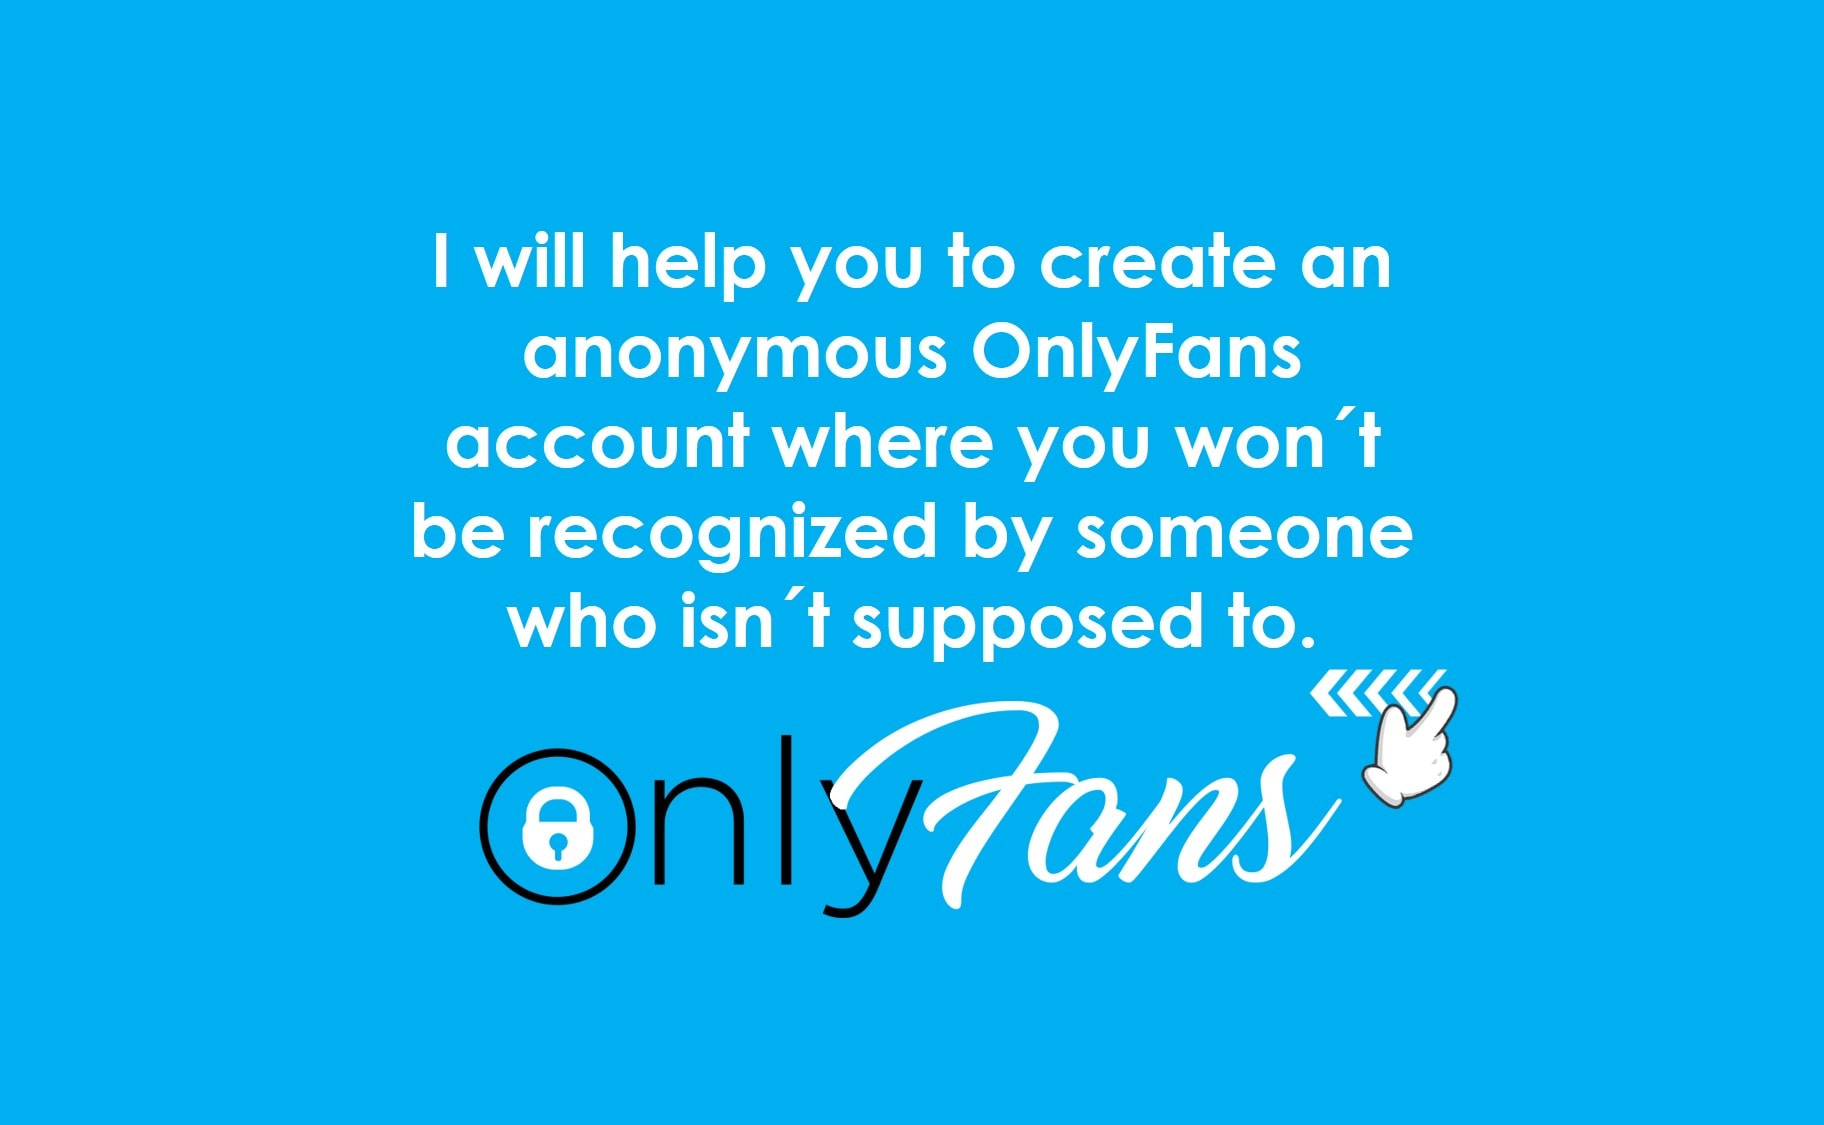 Staying anonymous on onlyfans